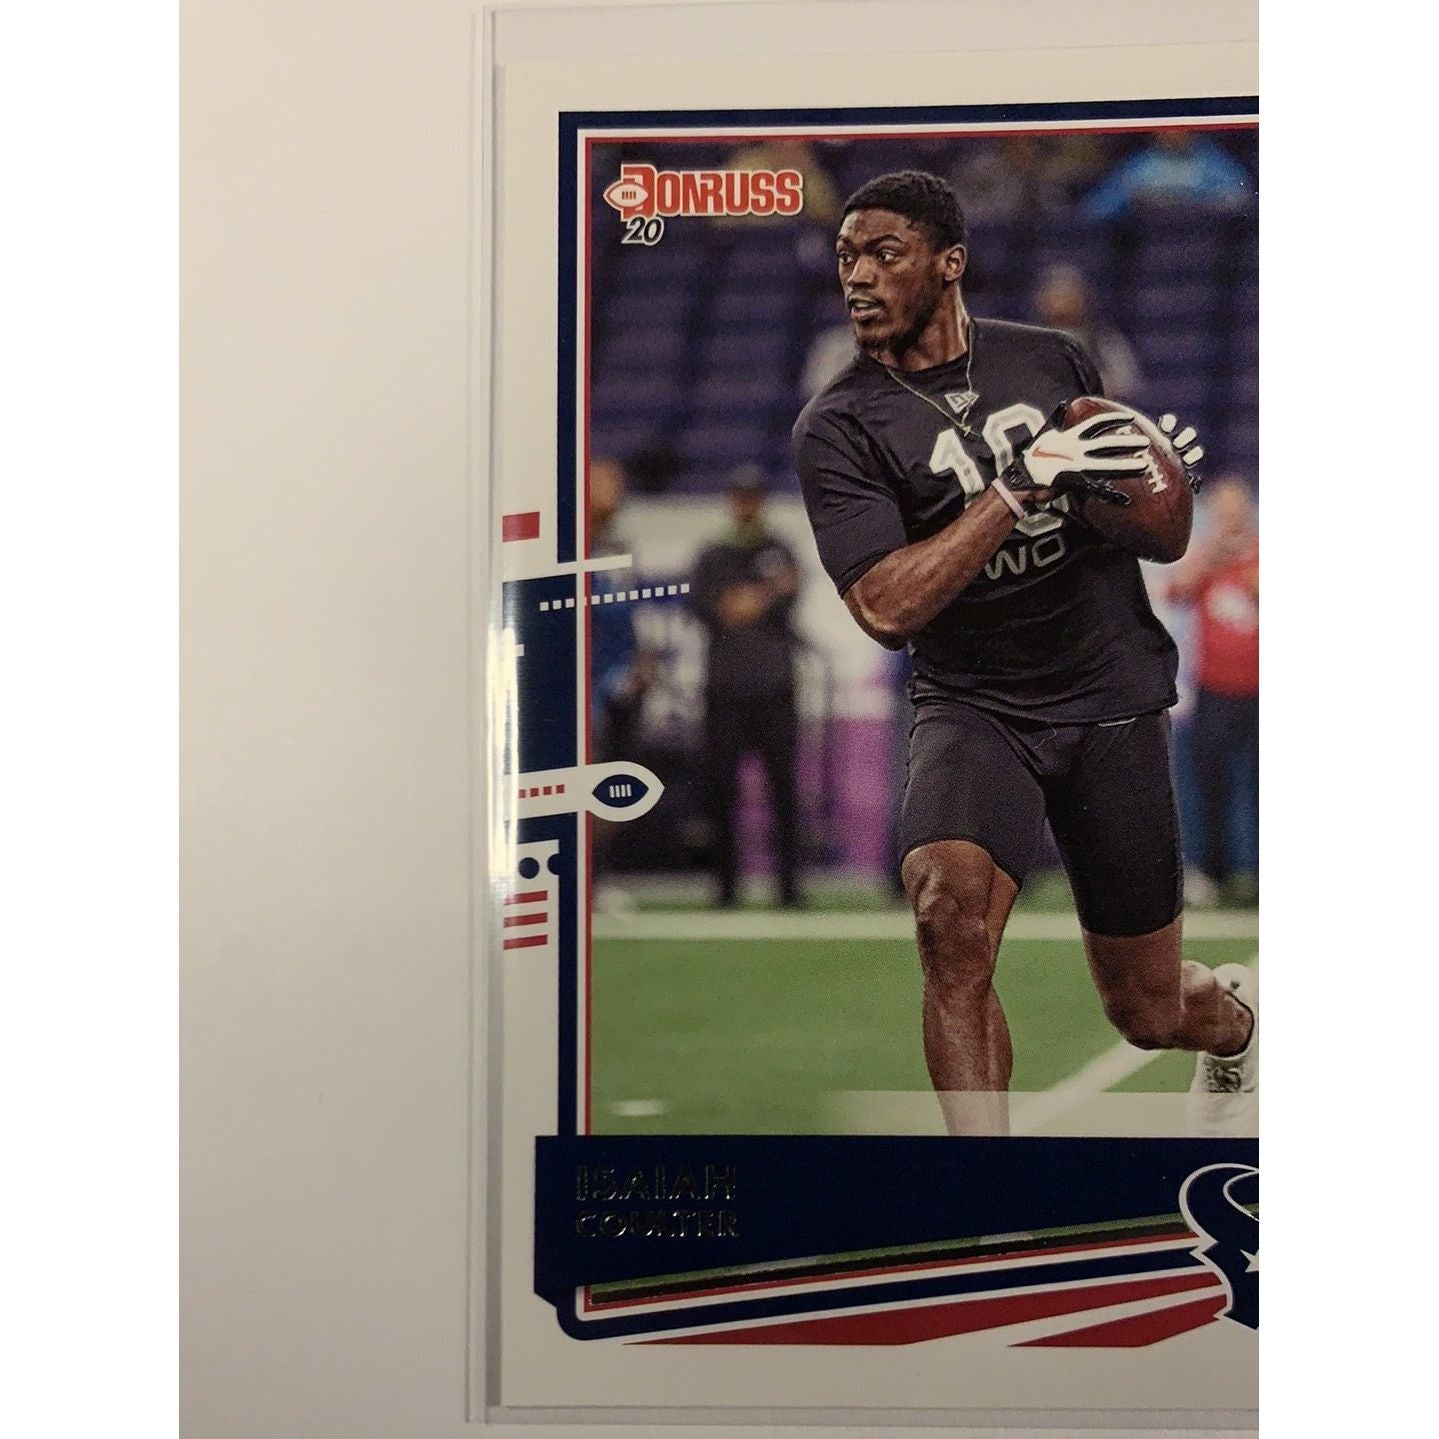  2020 Donruss Isaiah Coulter RC  Local Legends Cards & Collectibles